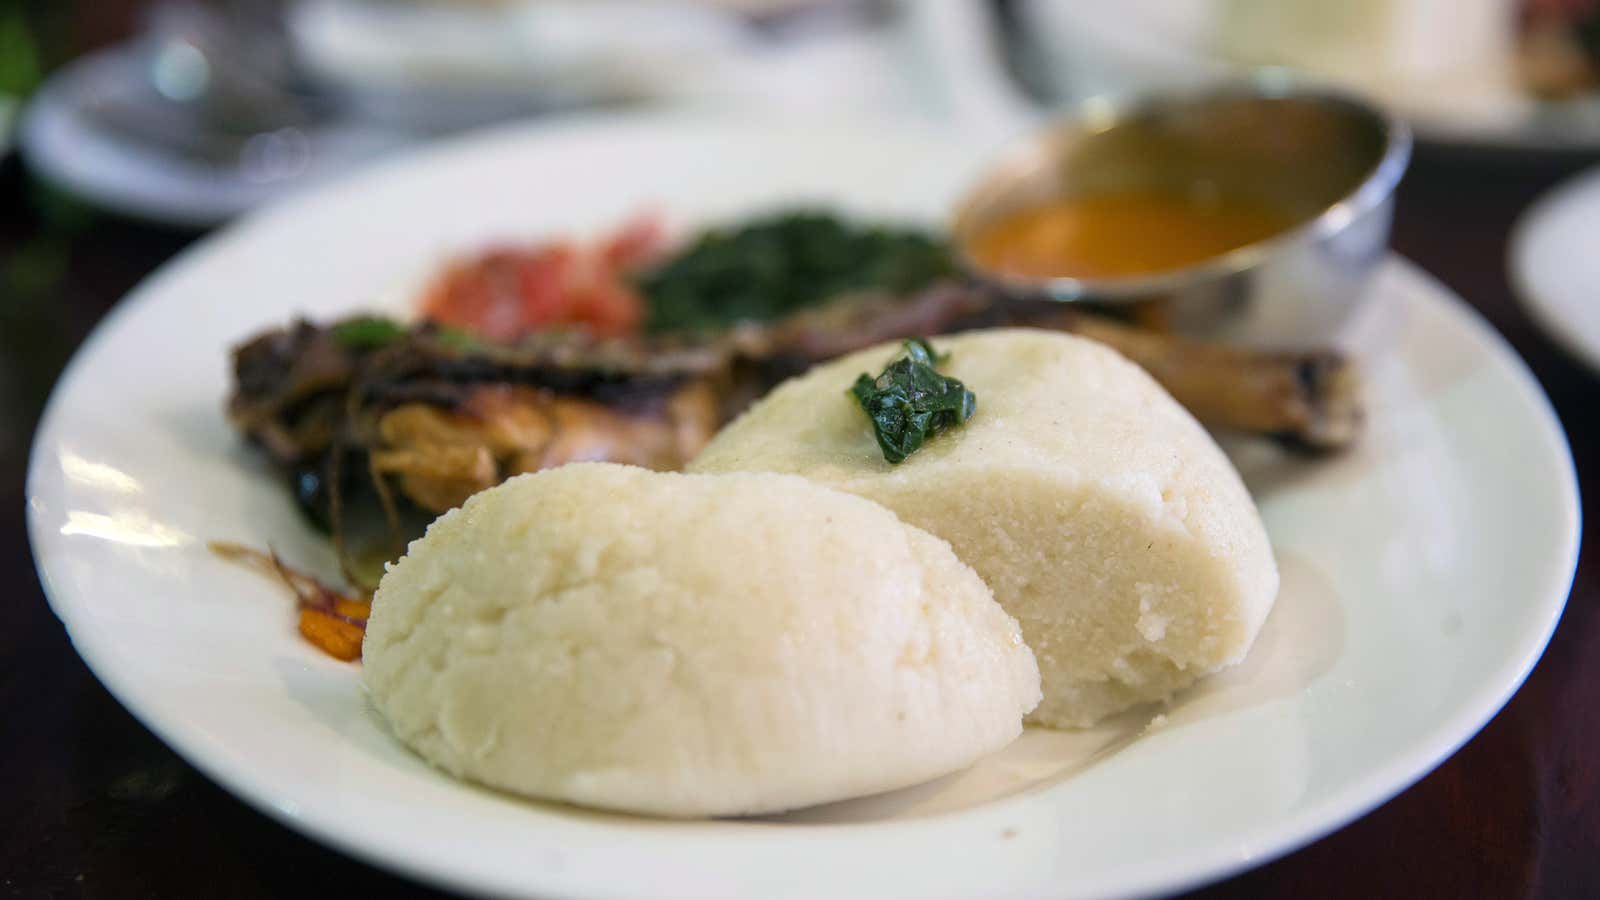 Finding affordable food in Nairobi has set off startup drama.